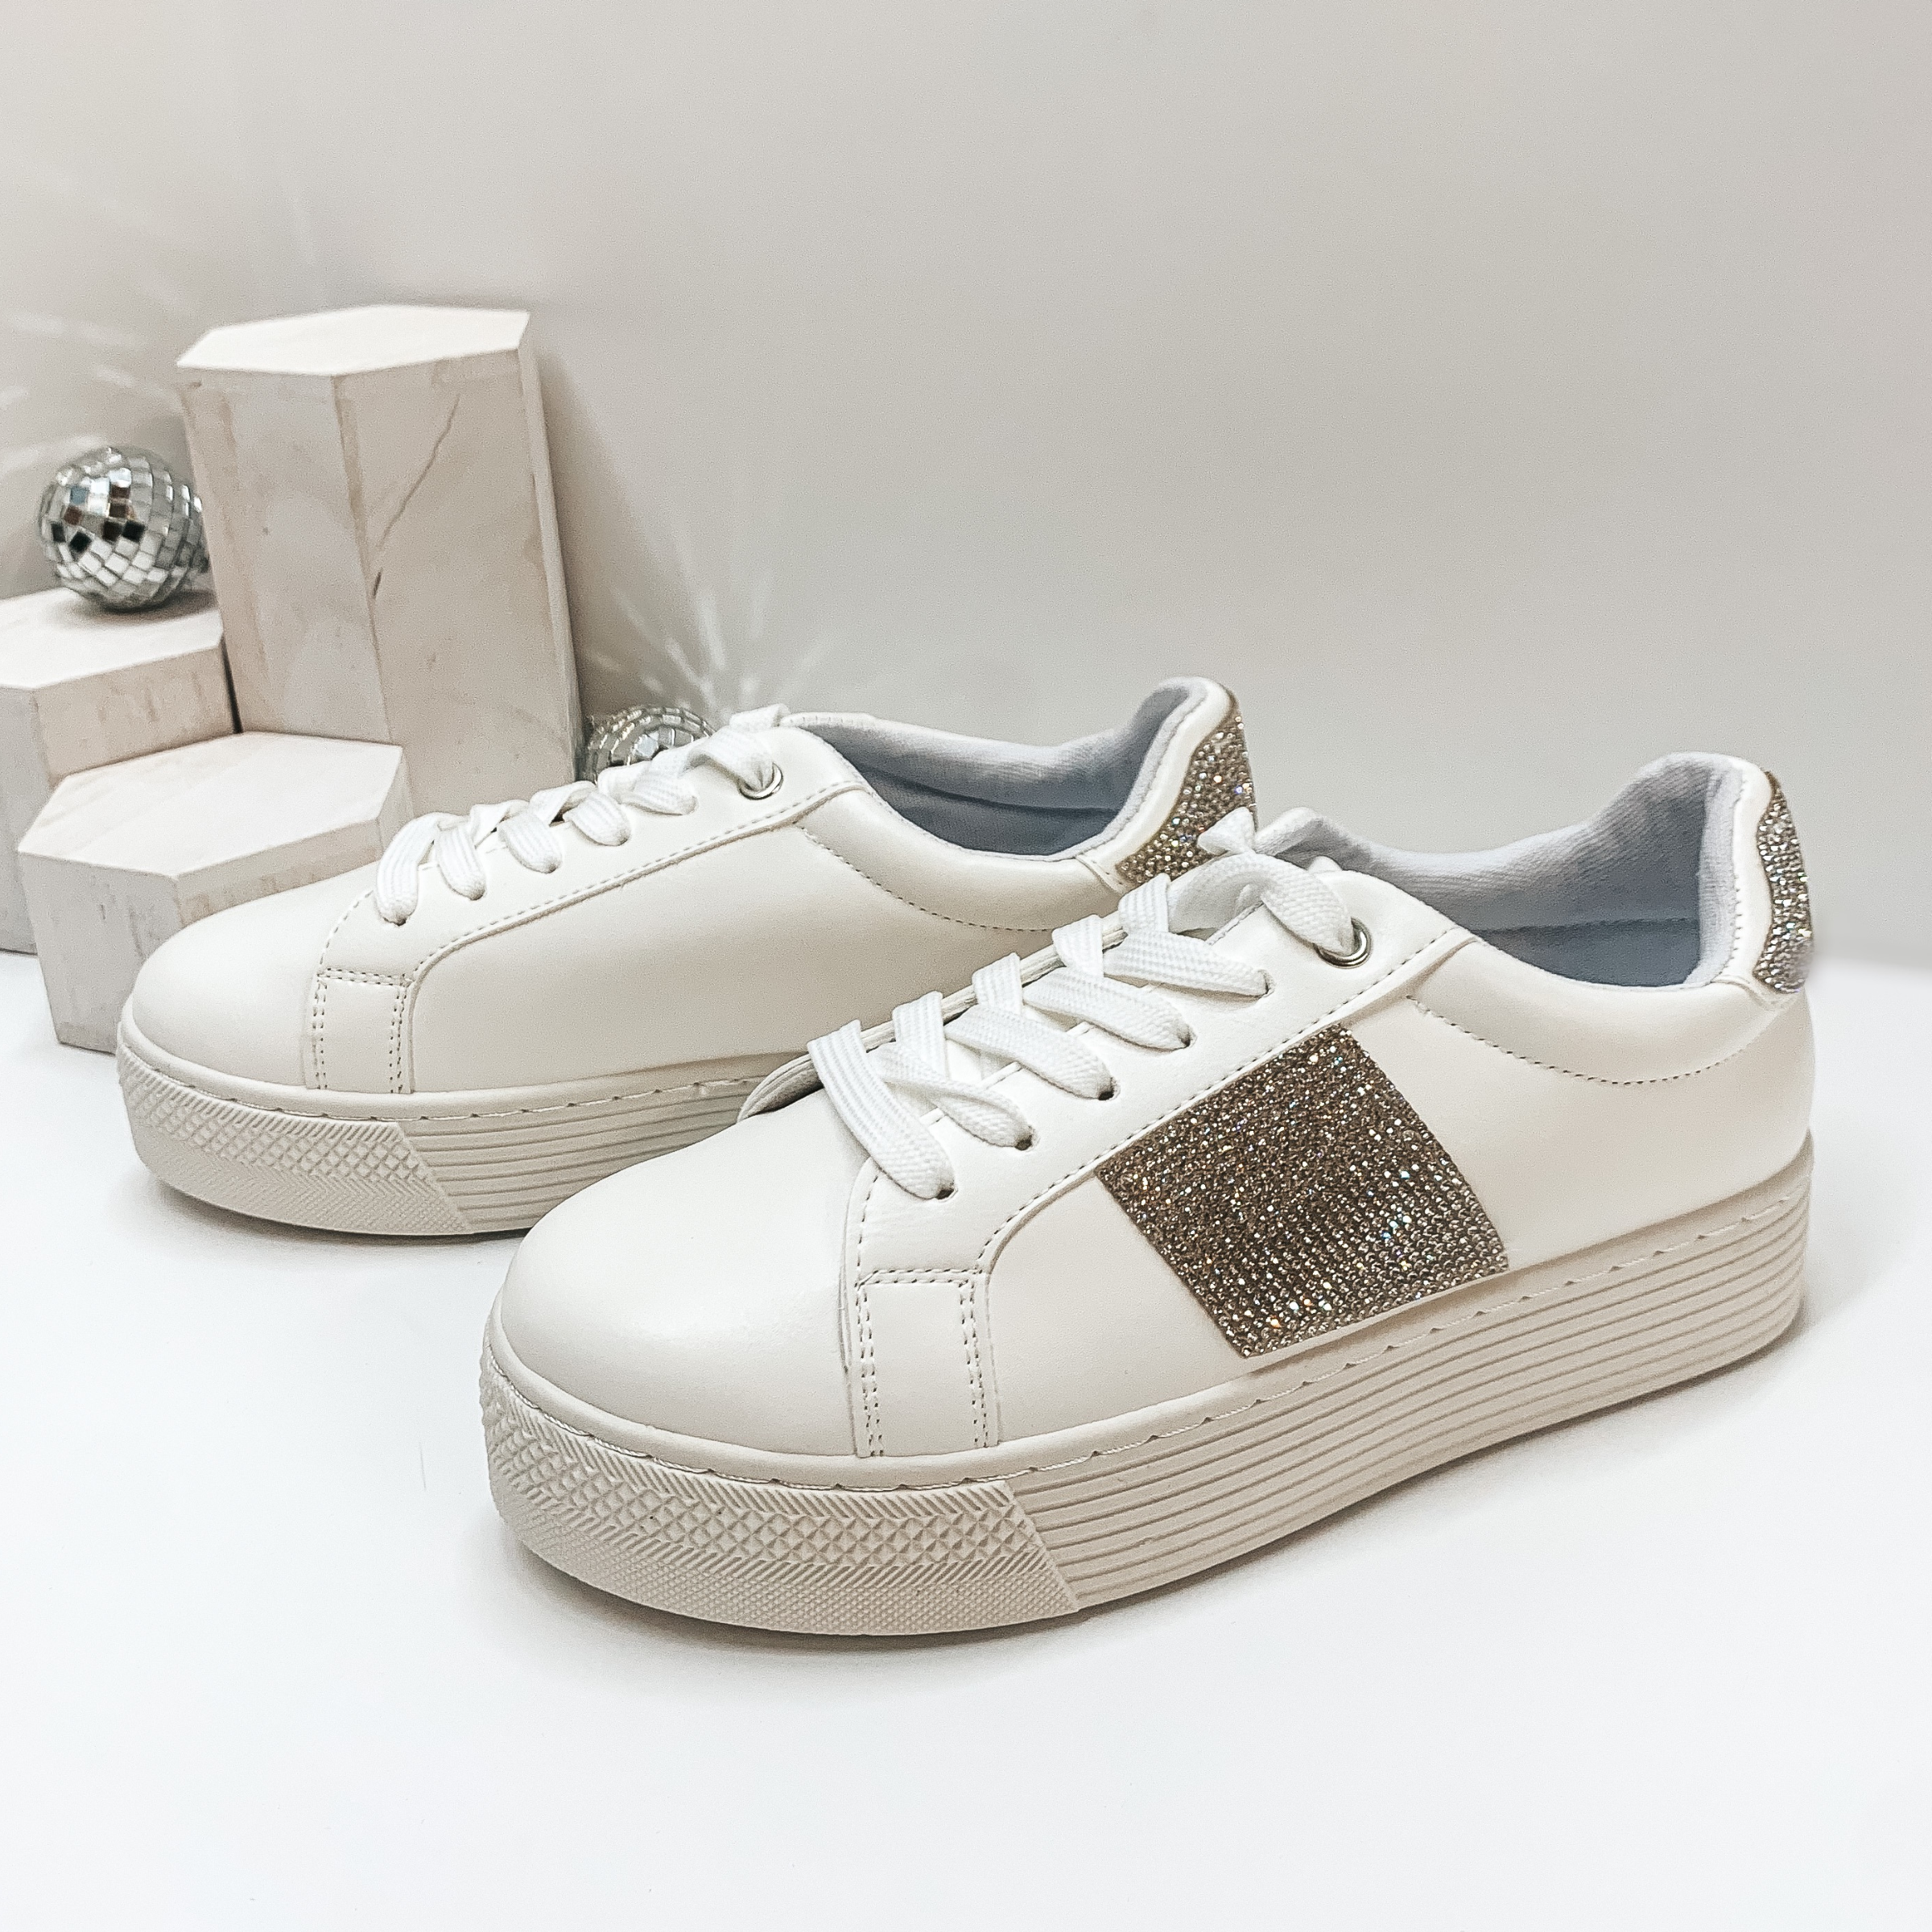 Shining Chic Lace Up Crystal Embellished Platform Sneakers in White - Giddy Up Glamour Boutique